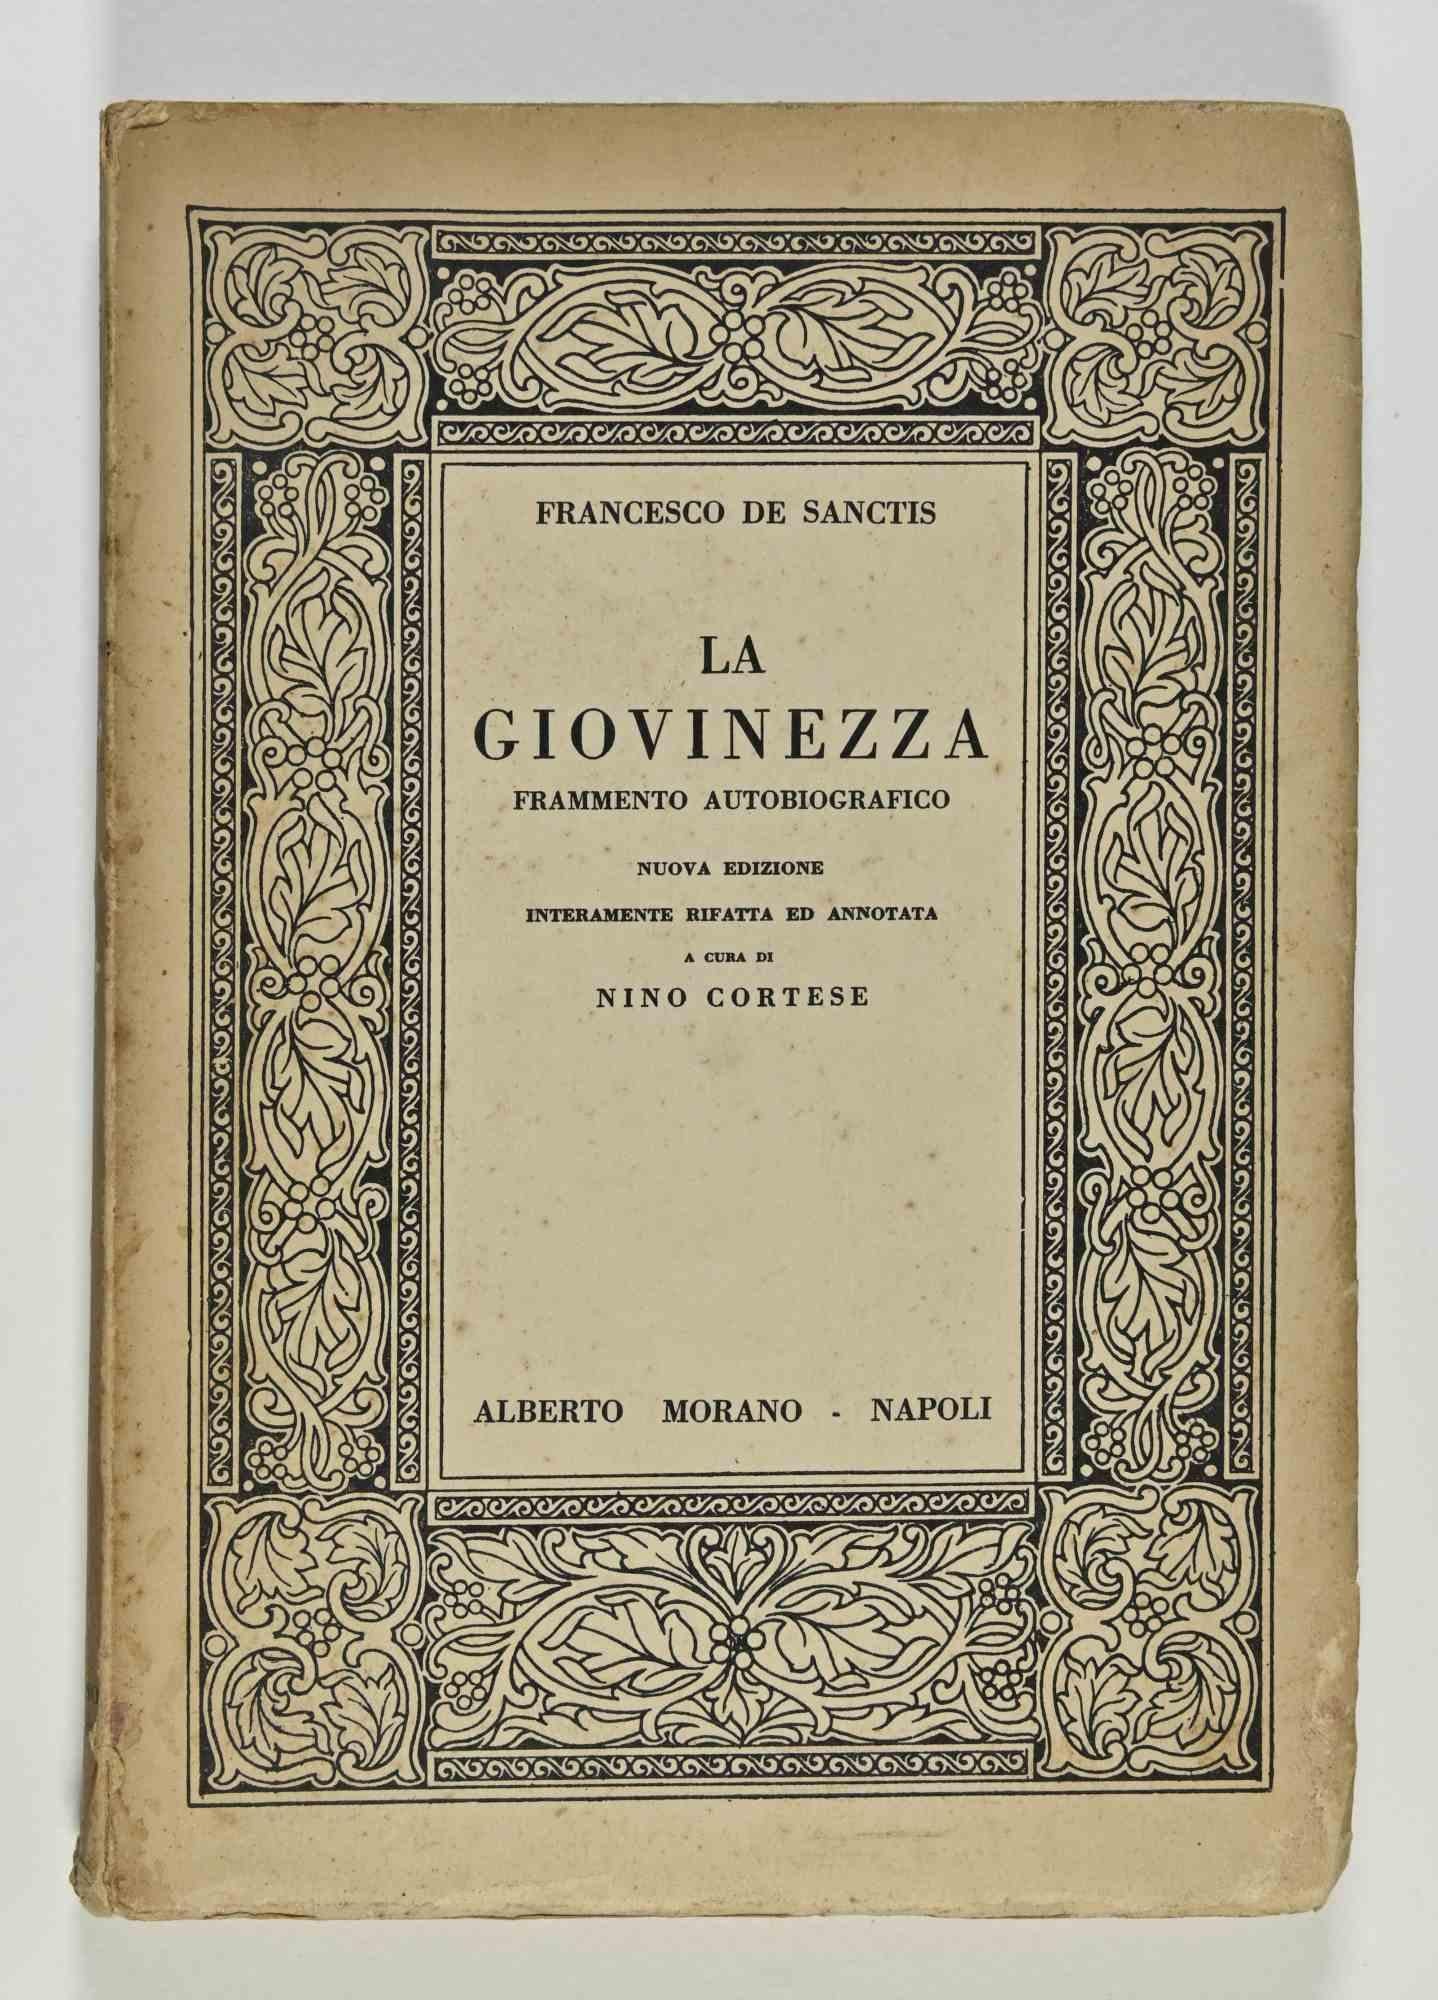 Youth is a book written by Francesco De Sanctis. 

Autobiographical fragment entirely redone and annotated by Nino Cortese.

Printed in Naples in the S.A. Graphic Workshops. ALberto Morano - 17 October 1936.

Work showing signs of aging and signs of